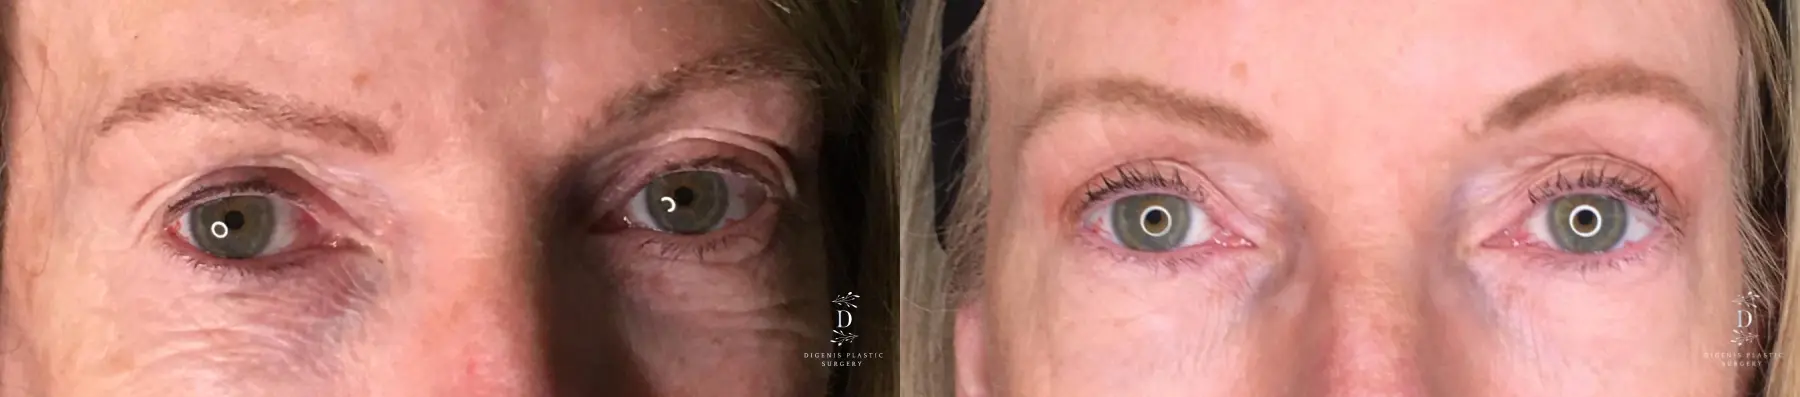 Eyelid Surgery: Patient 23 - Before and After 1